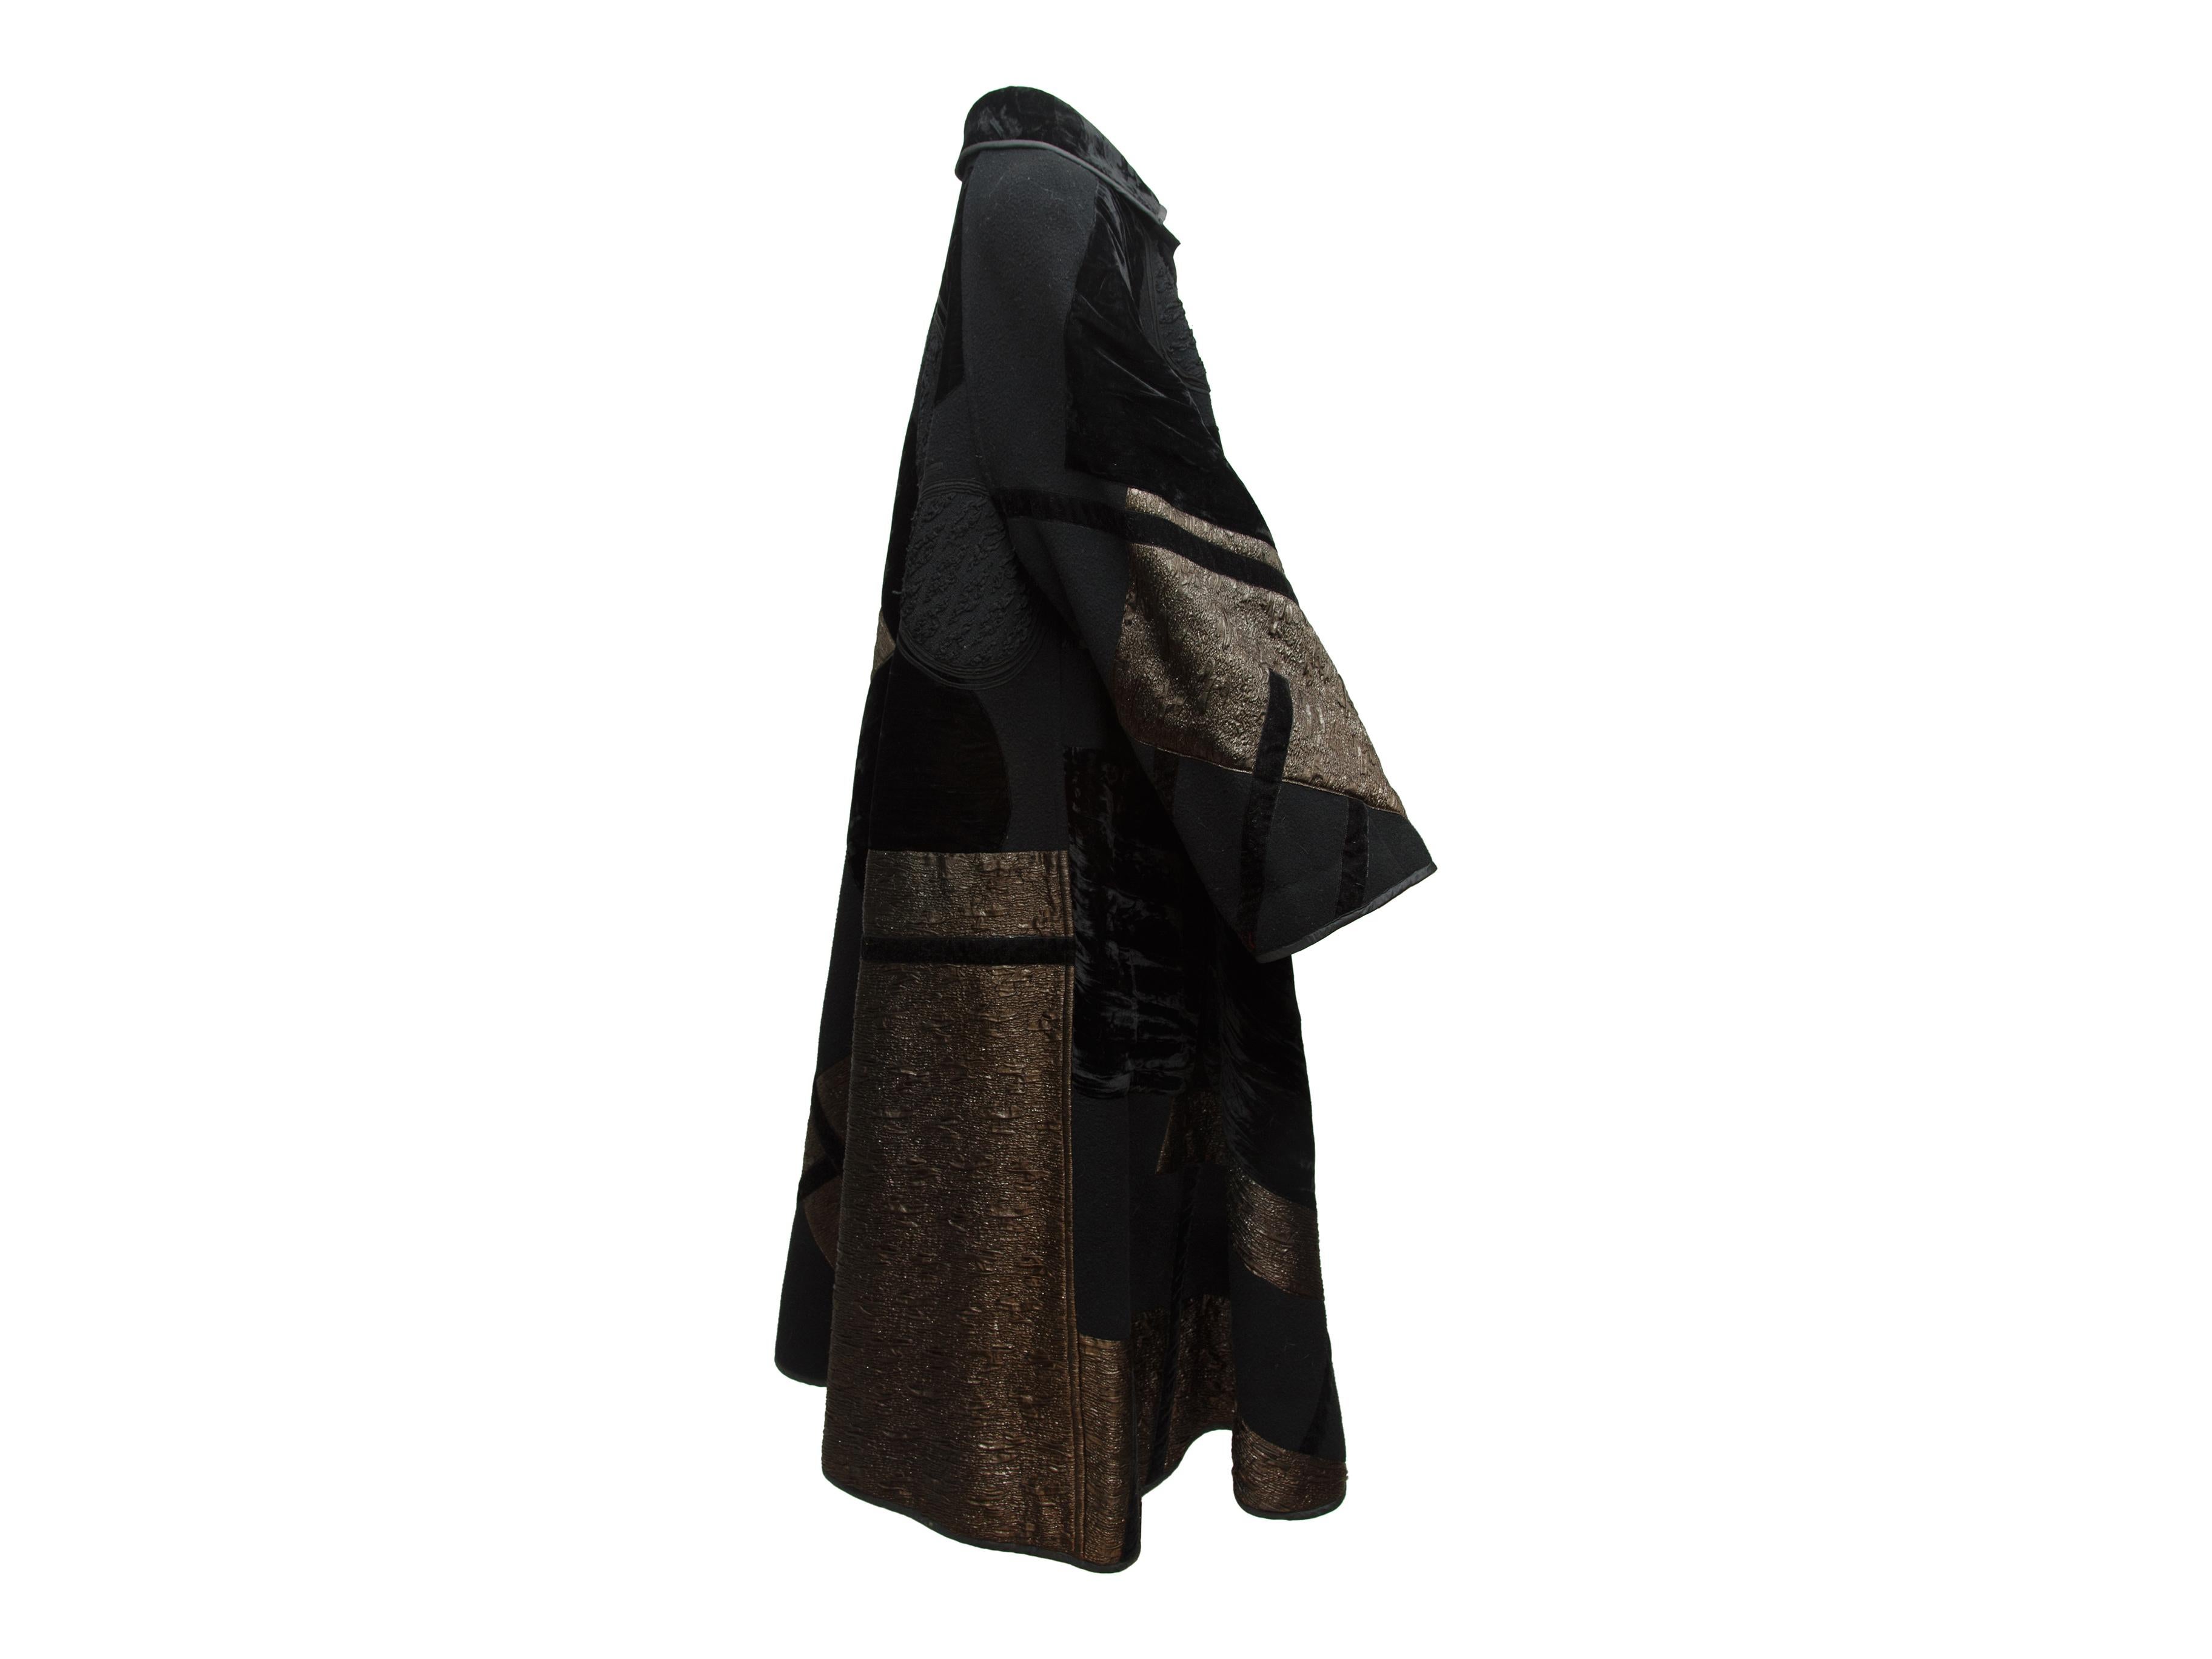 Product details: Black velvet long coat by Koos Van Den Akker Couture. Metallic brocade and velvet abstract pattern throughout. Pointed collar. Button closures at front. 40